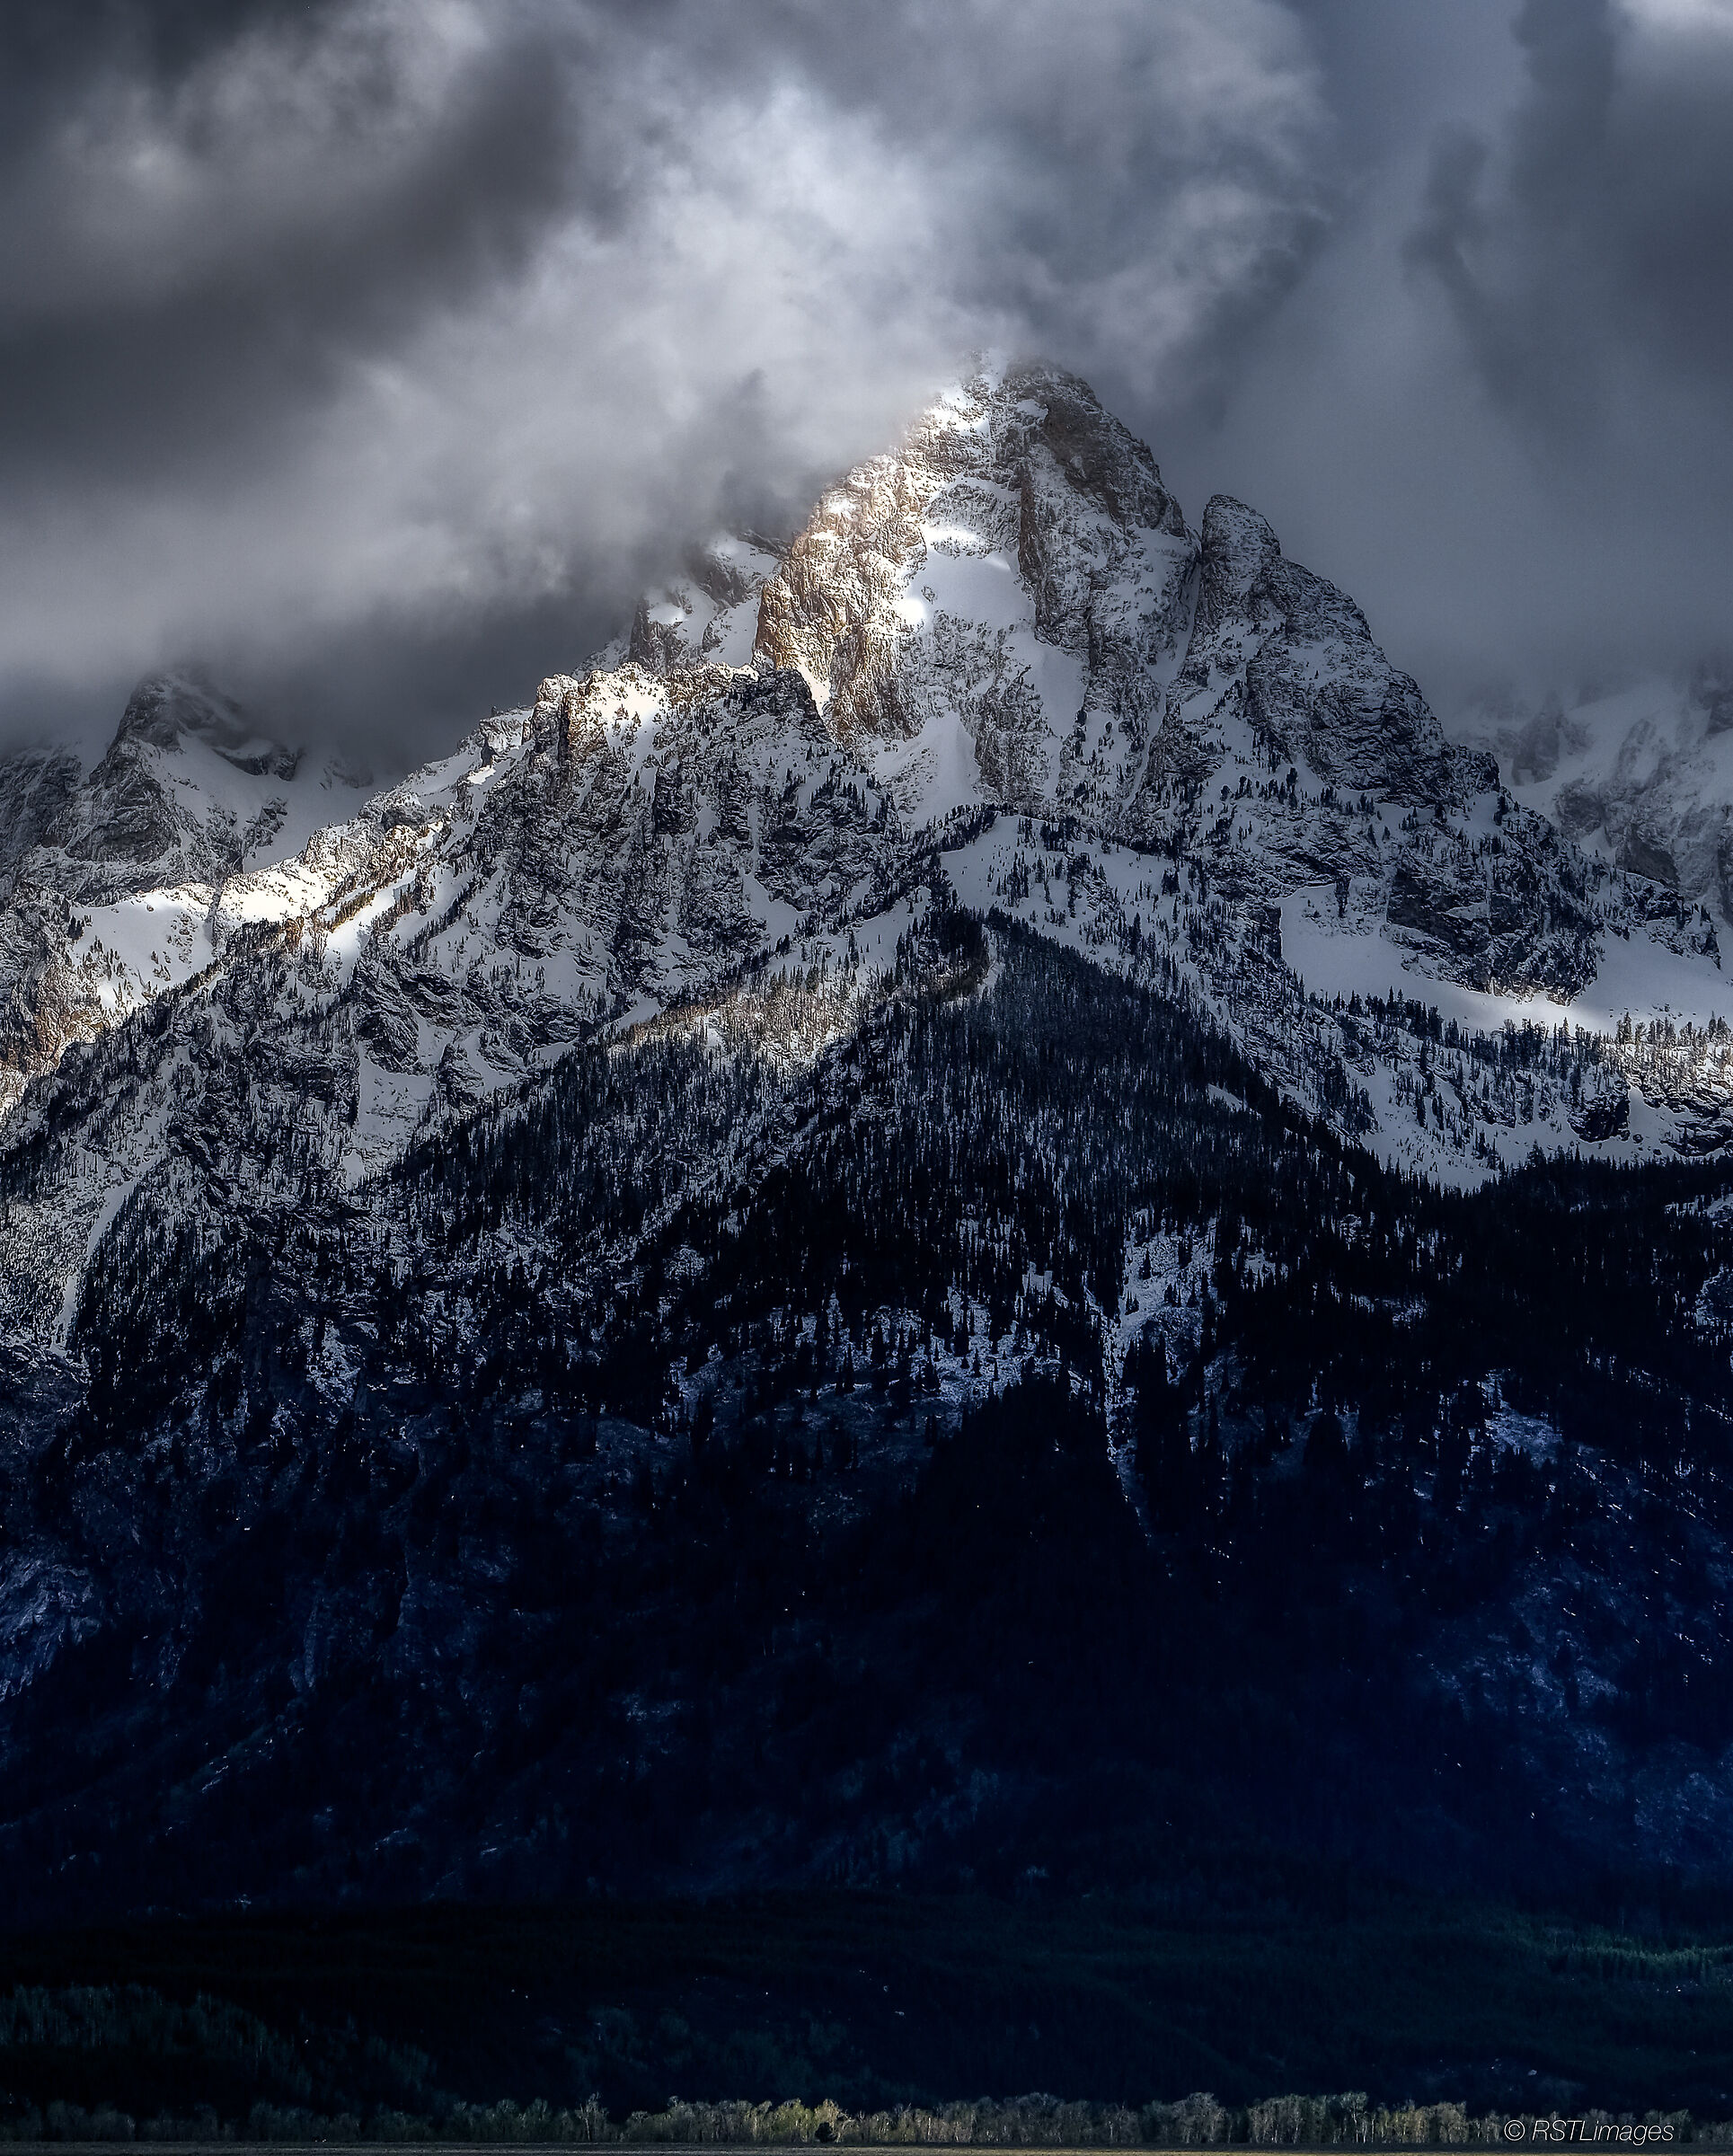 Snow Shower over the Grand Tetons...